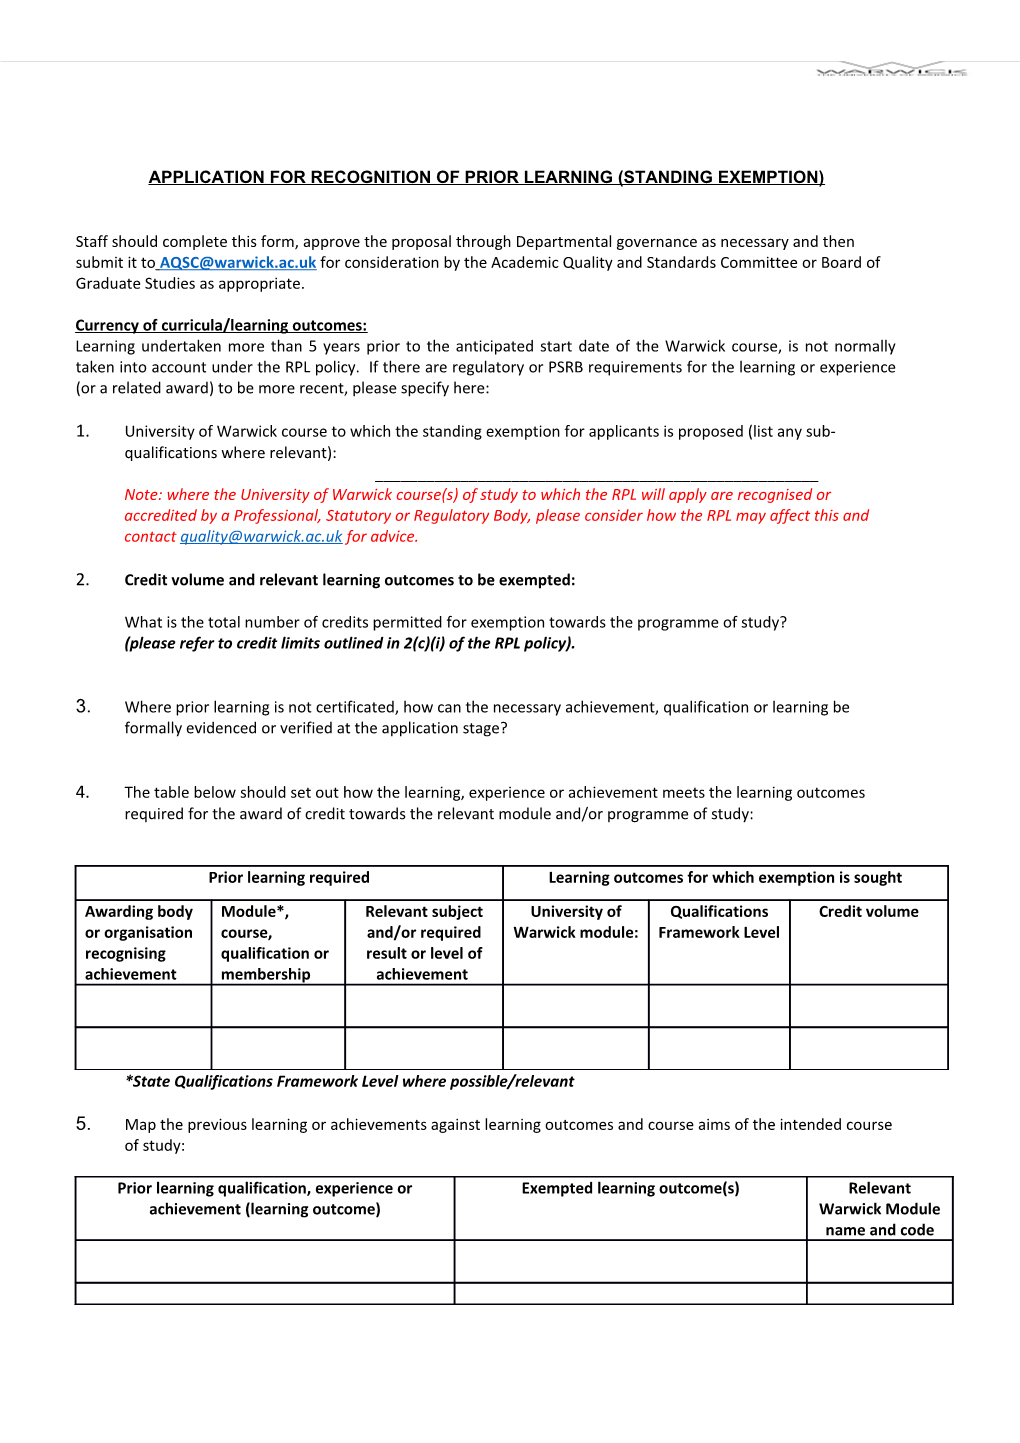 Application for Recognition of Prior Learning (Standing Exemption)